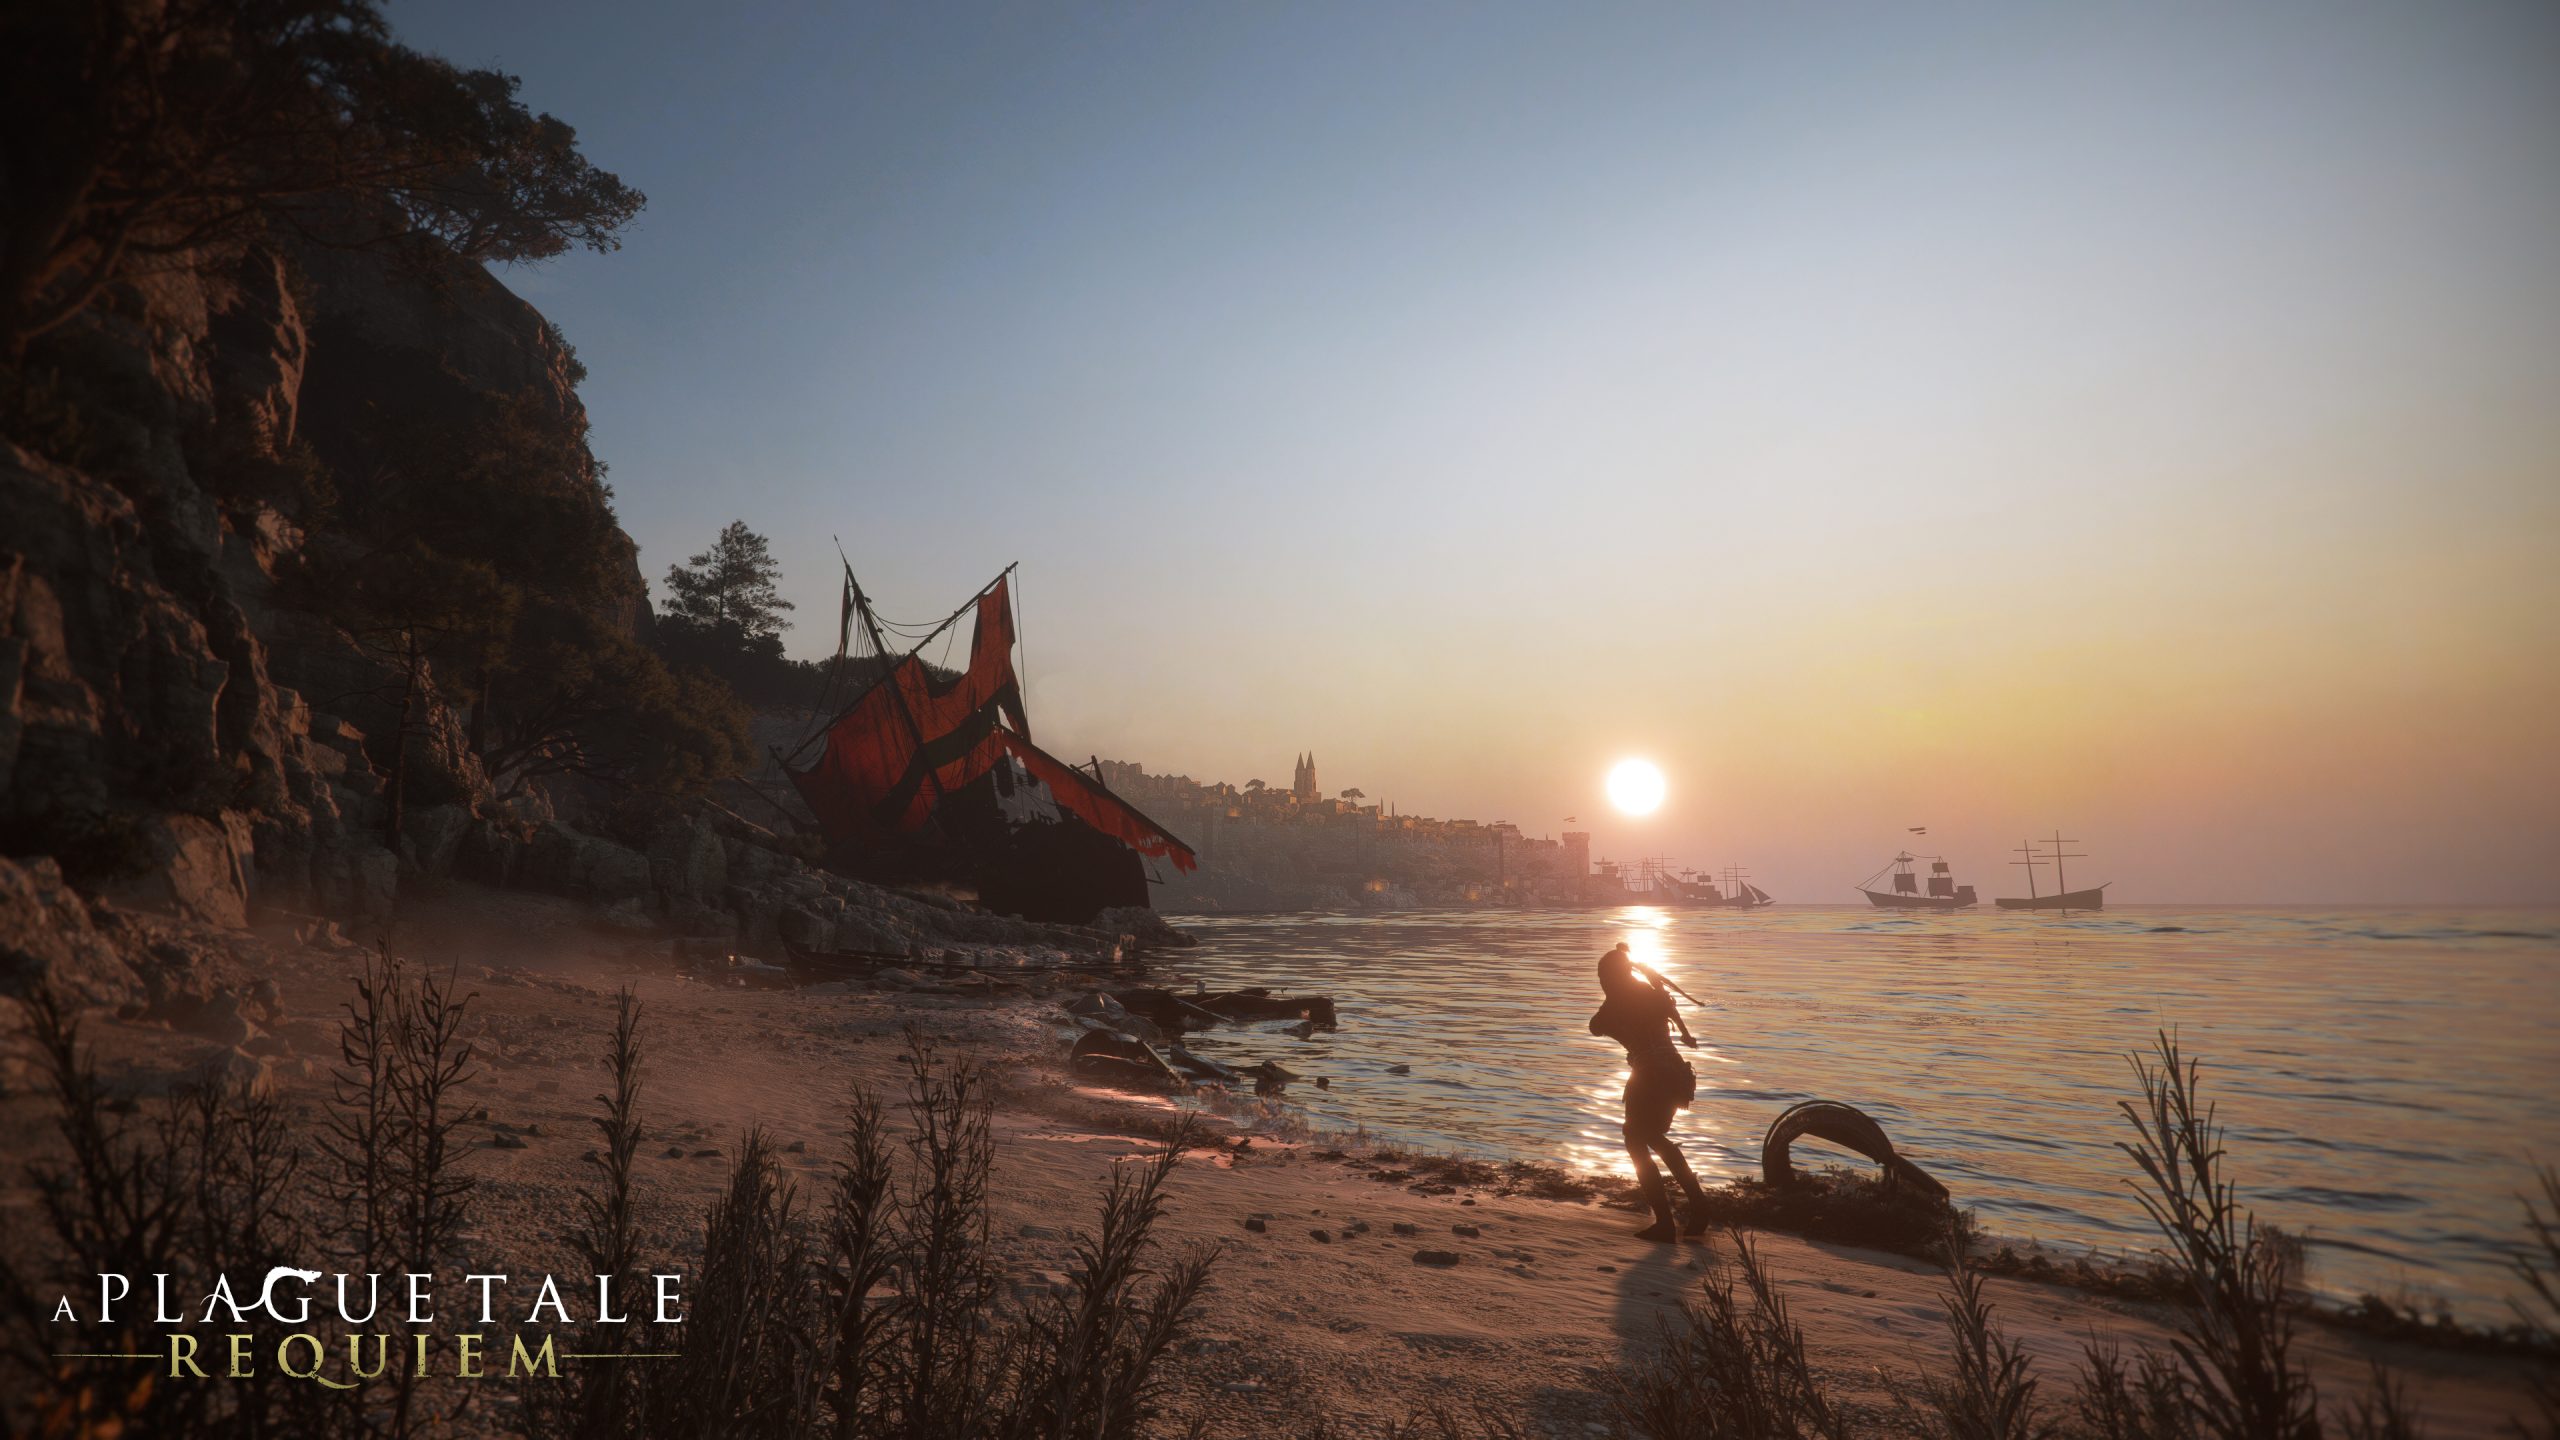 The Perplexing Tale of A Plague Tale: Requiem